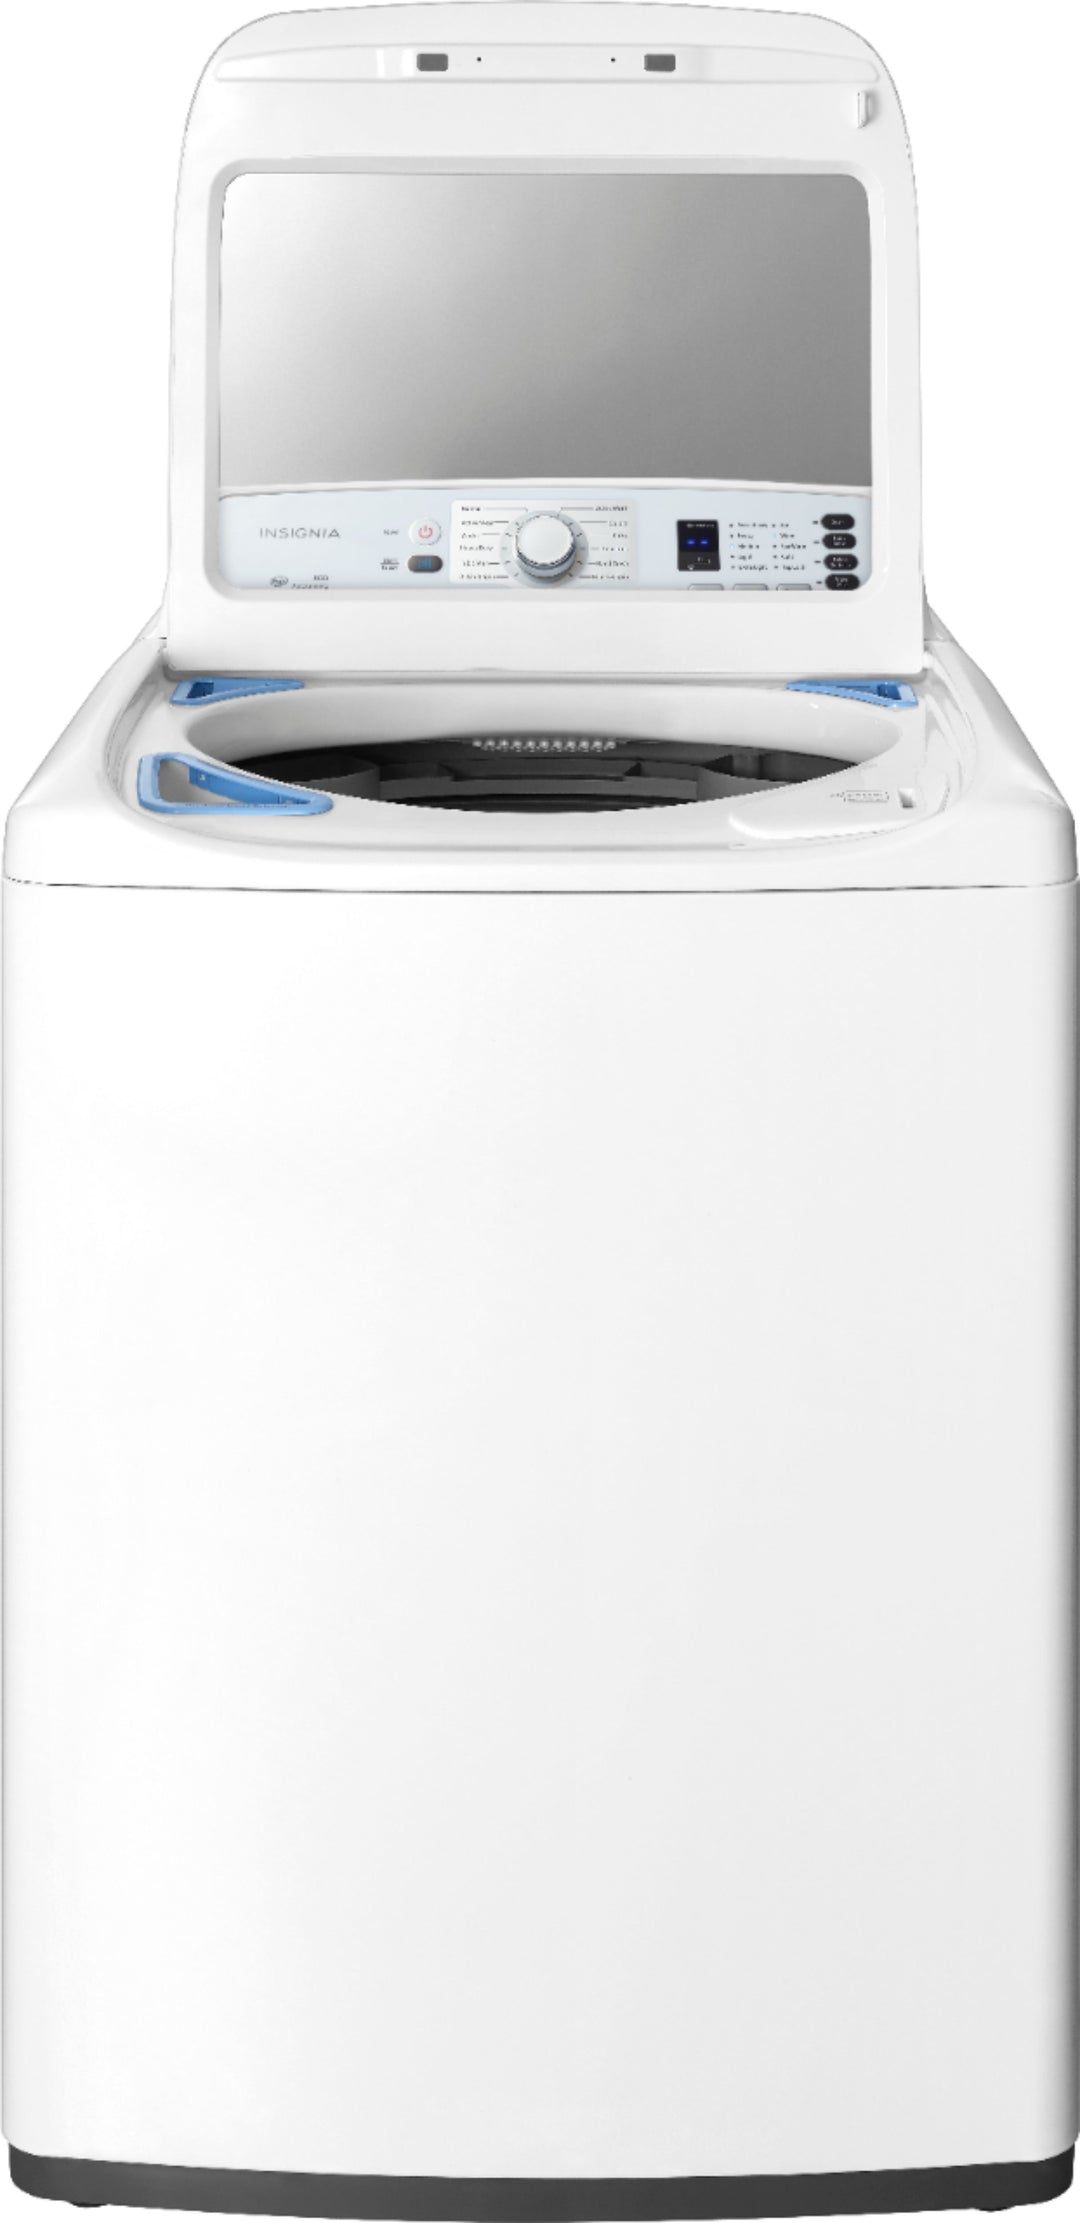 Insignia™ - 4.1 Cu. Ft. High Efficiency Top Load Washer - White_7